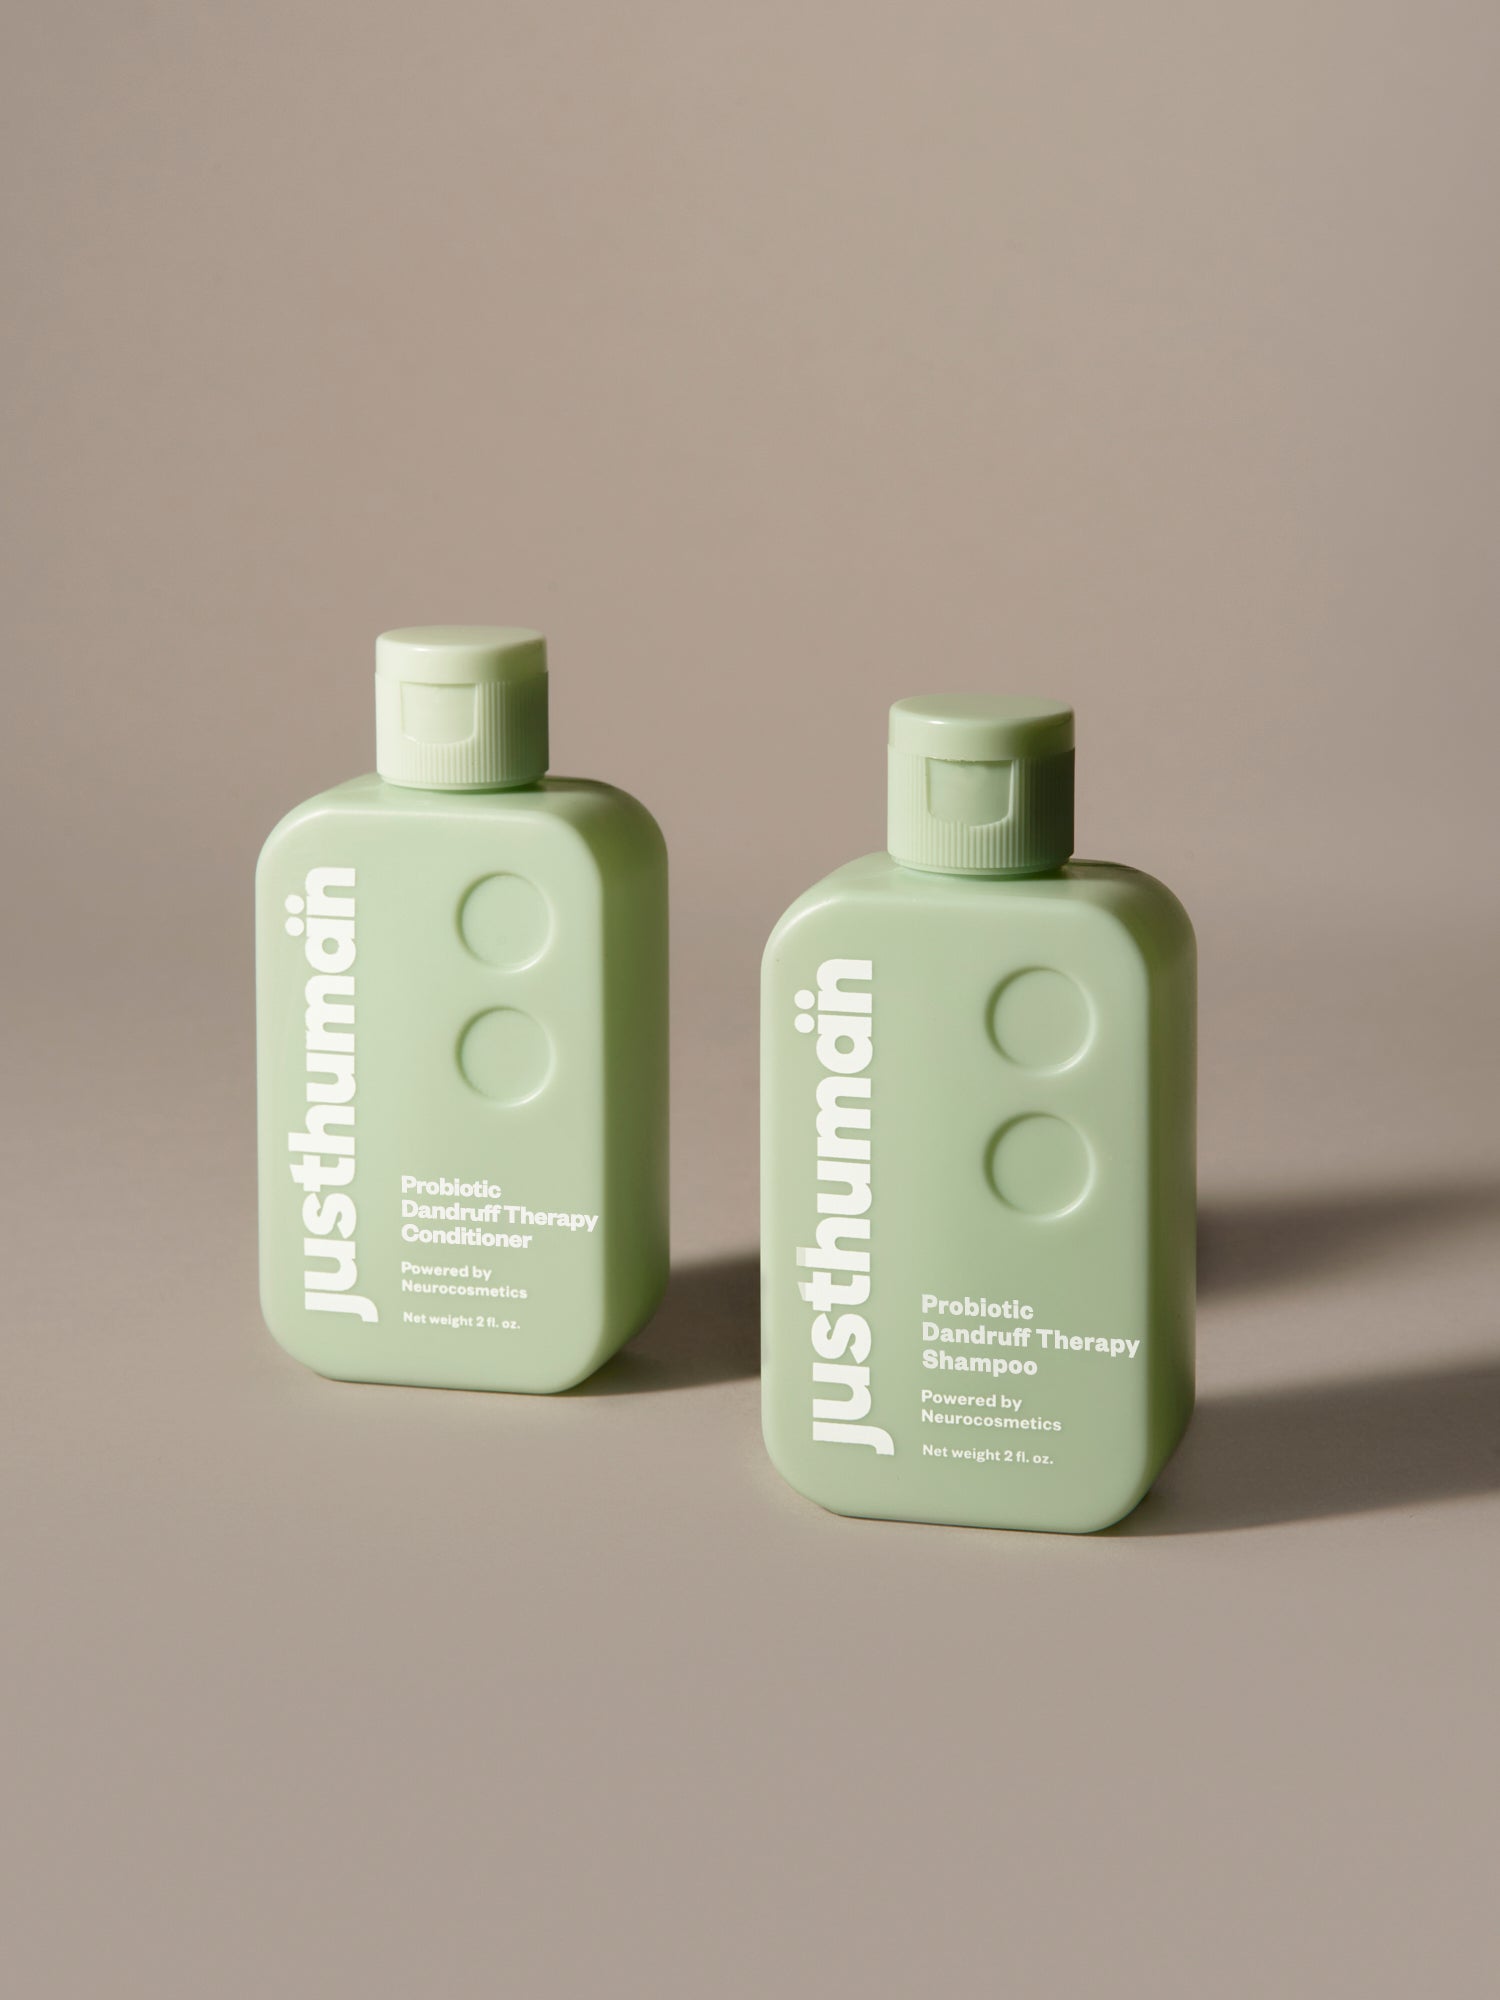 Probiotic Dandruff Therapy Duo JustHuman